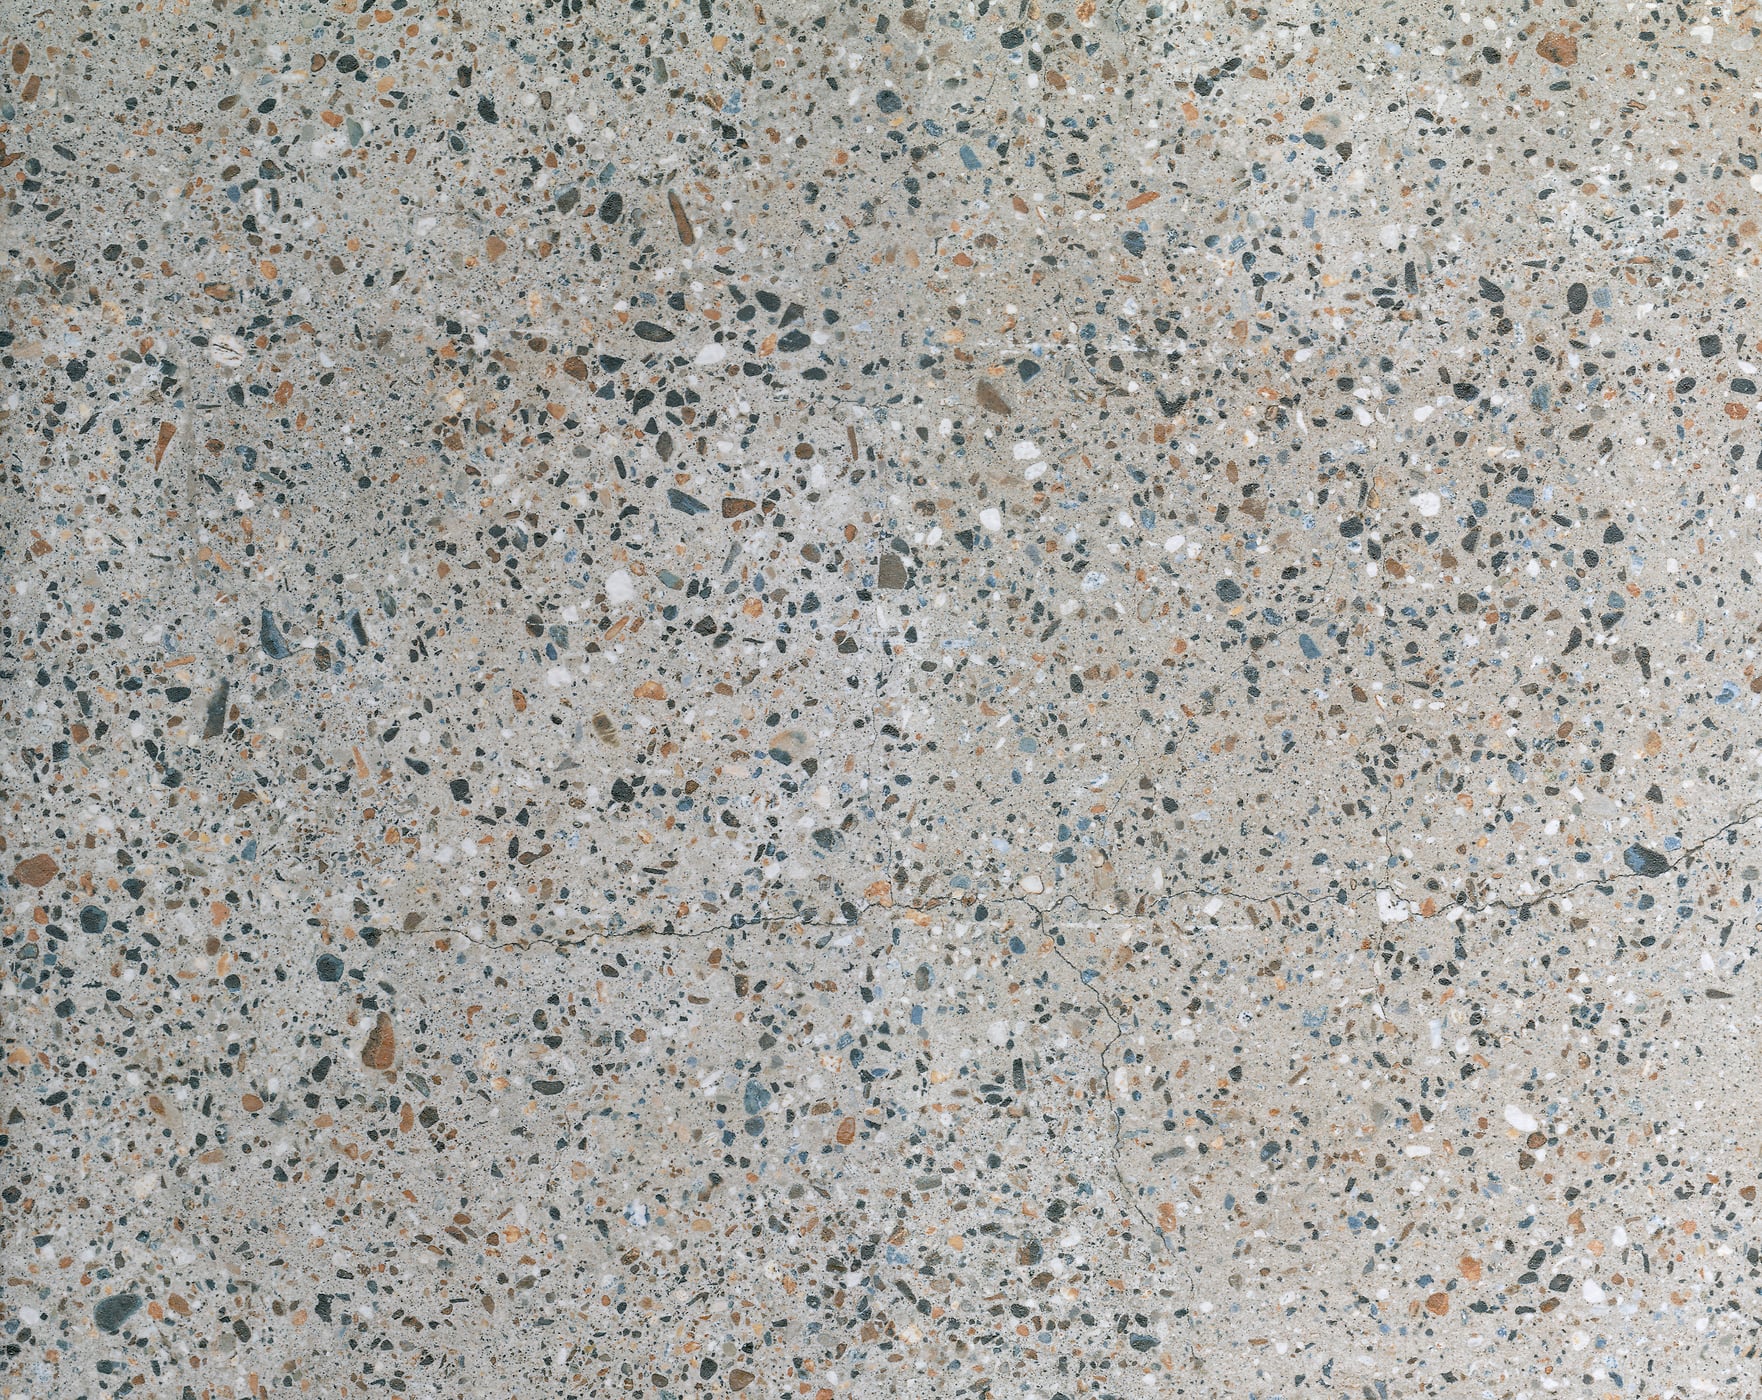 1,200 megapixels! An ultra-high-resolution texture photo file of real concrete terrazzo; gigapixel photograph created by David Lineton.